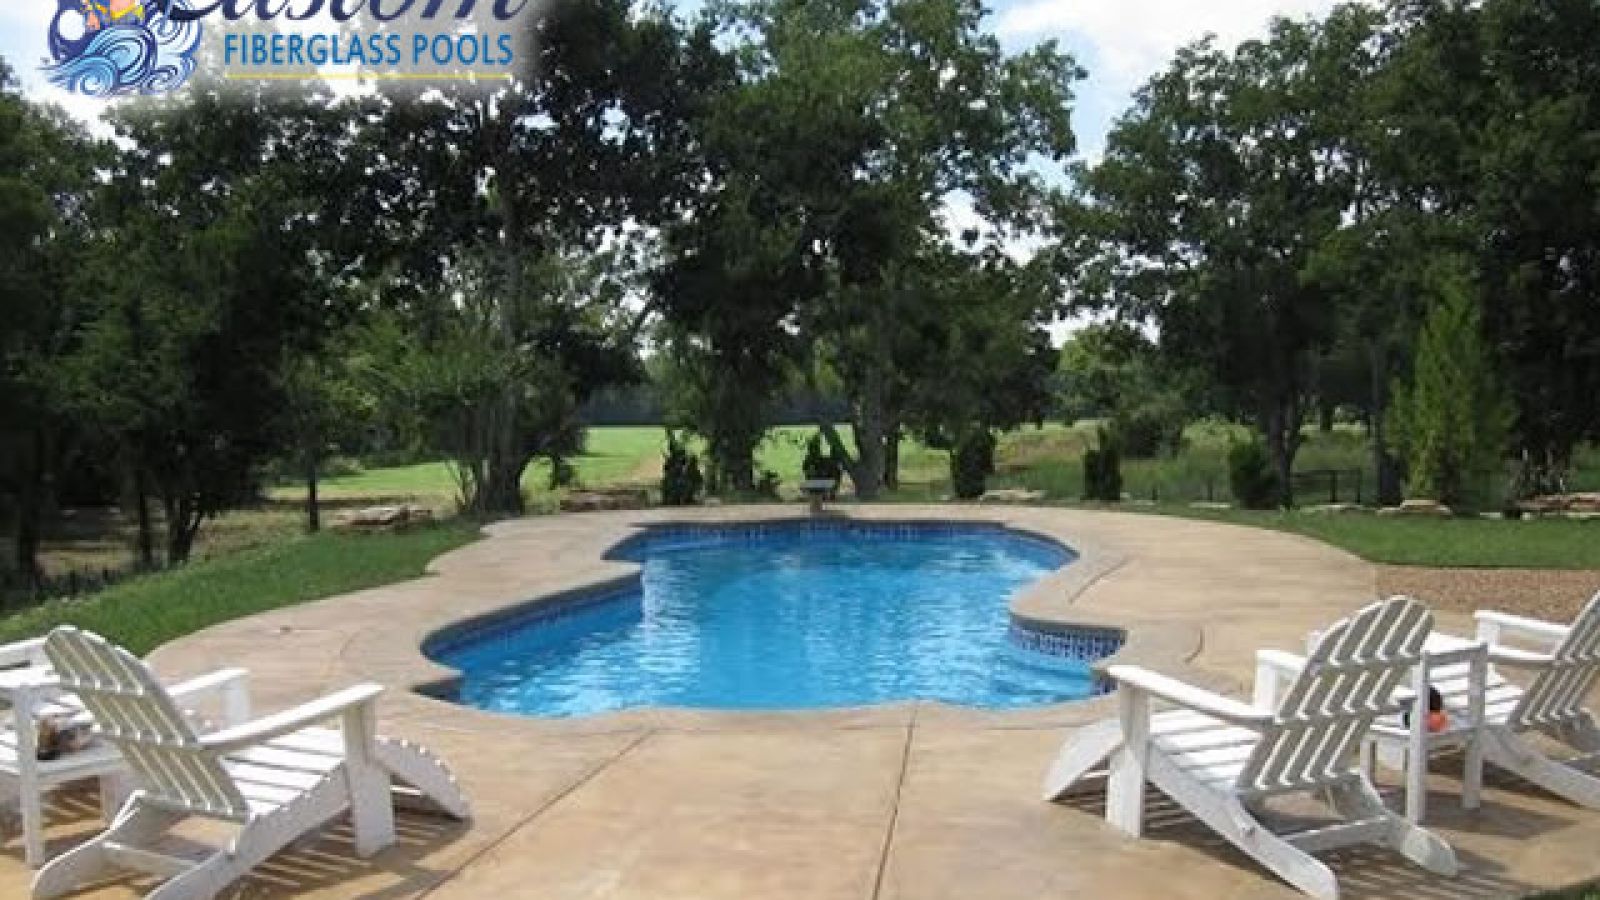 Pacific Deep Fiberglass Pool, a luxurious and curvaceous addition to a Clarksville, TN backyard